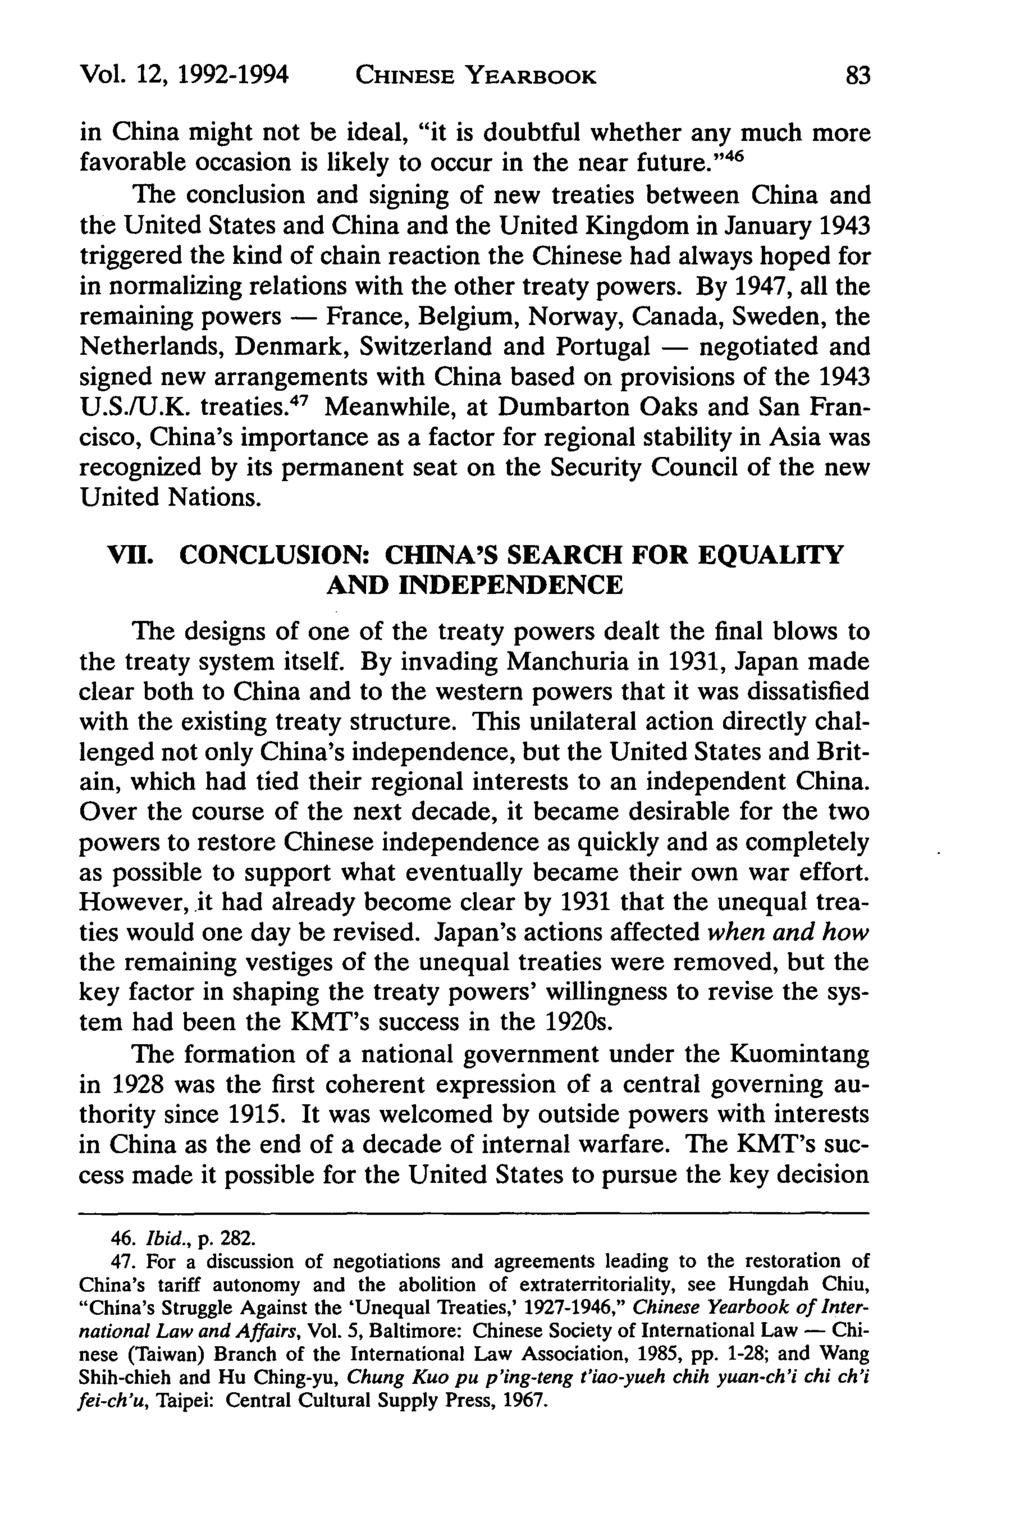 Vol. 12, 1992-1994 CHINESE YEARBOOK in China might not be ideal, "it is doubtful whether any much more favorable occasion is likely to occur in the near future.